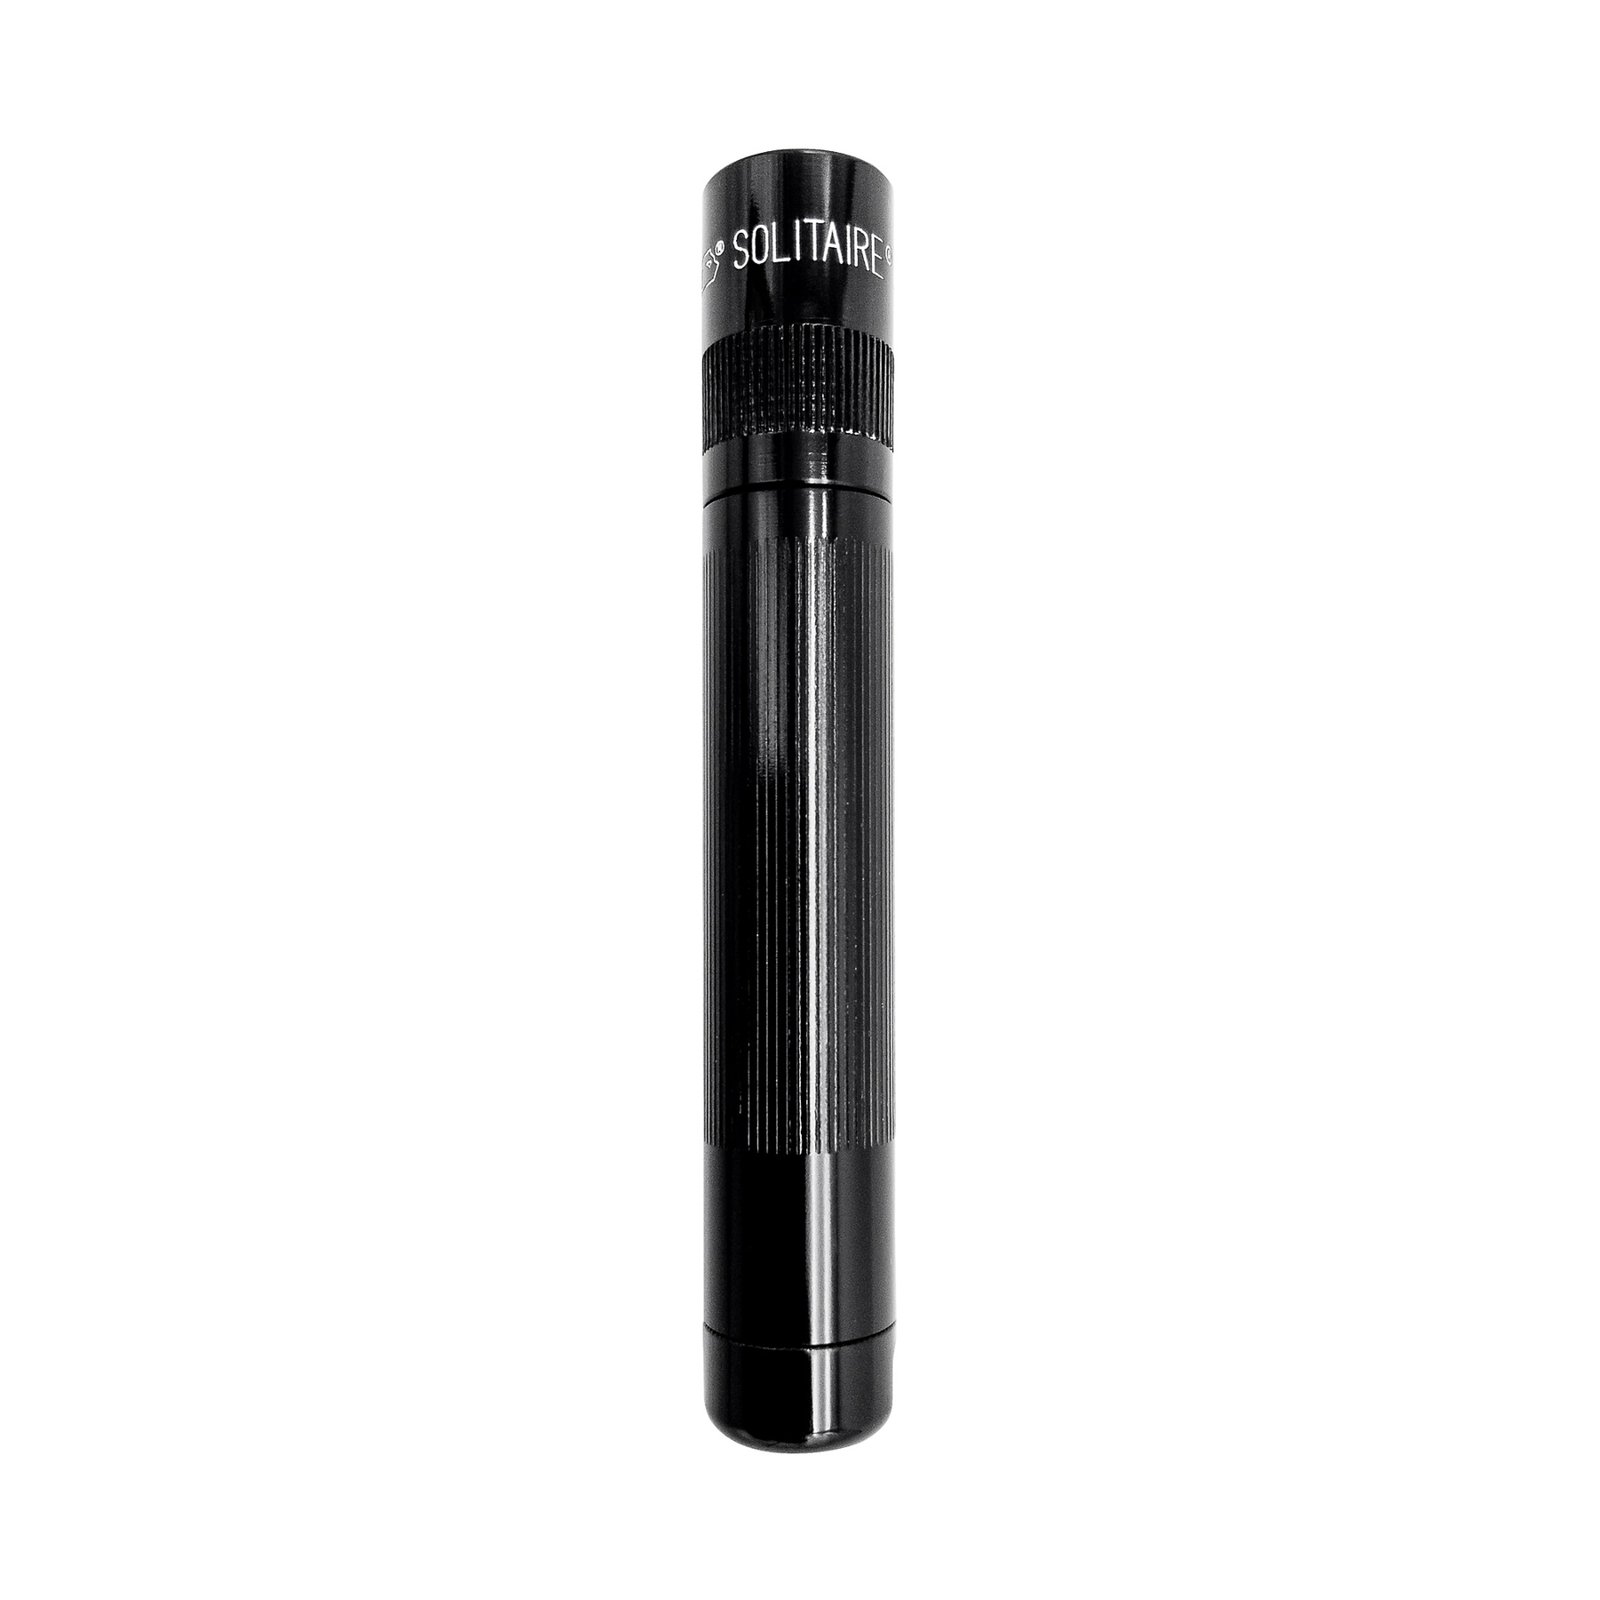 Maglite LED-ficklampa Solitaire, 1-cell AAA, låda, svart